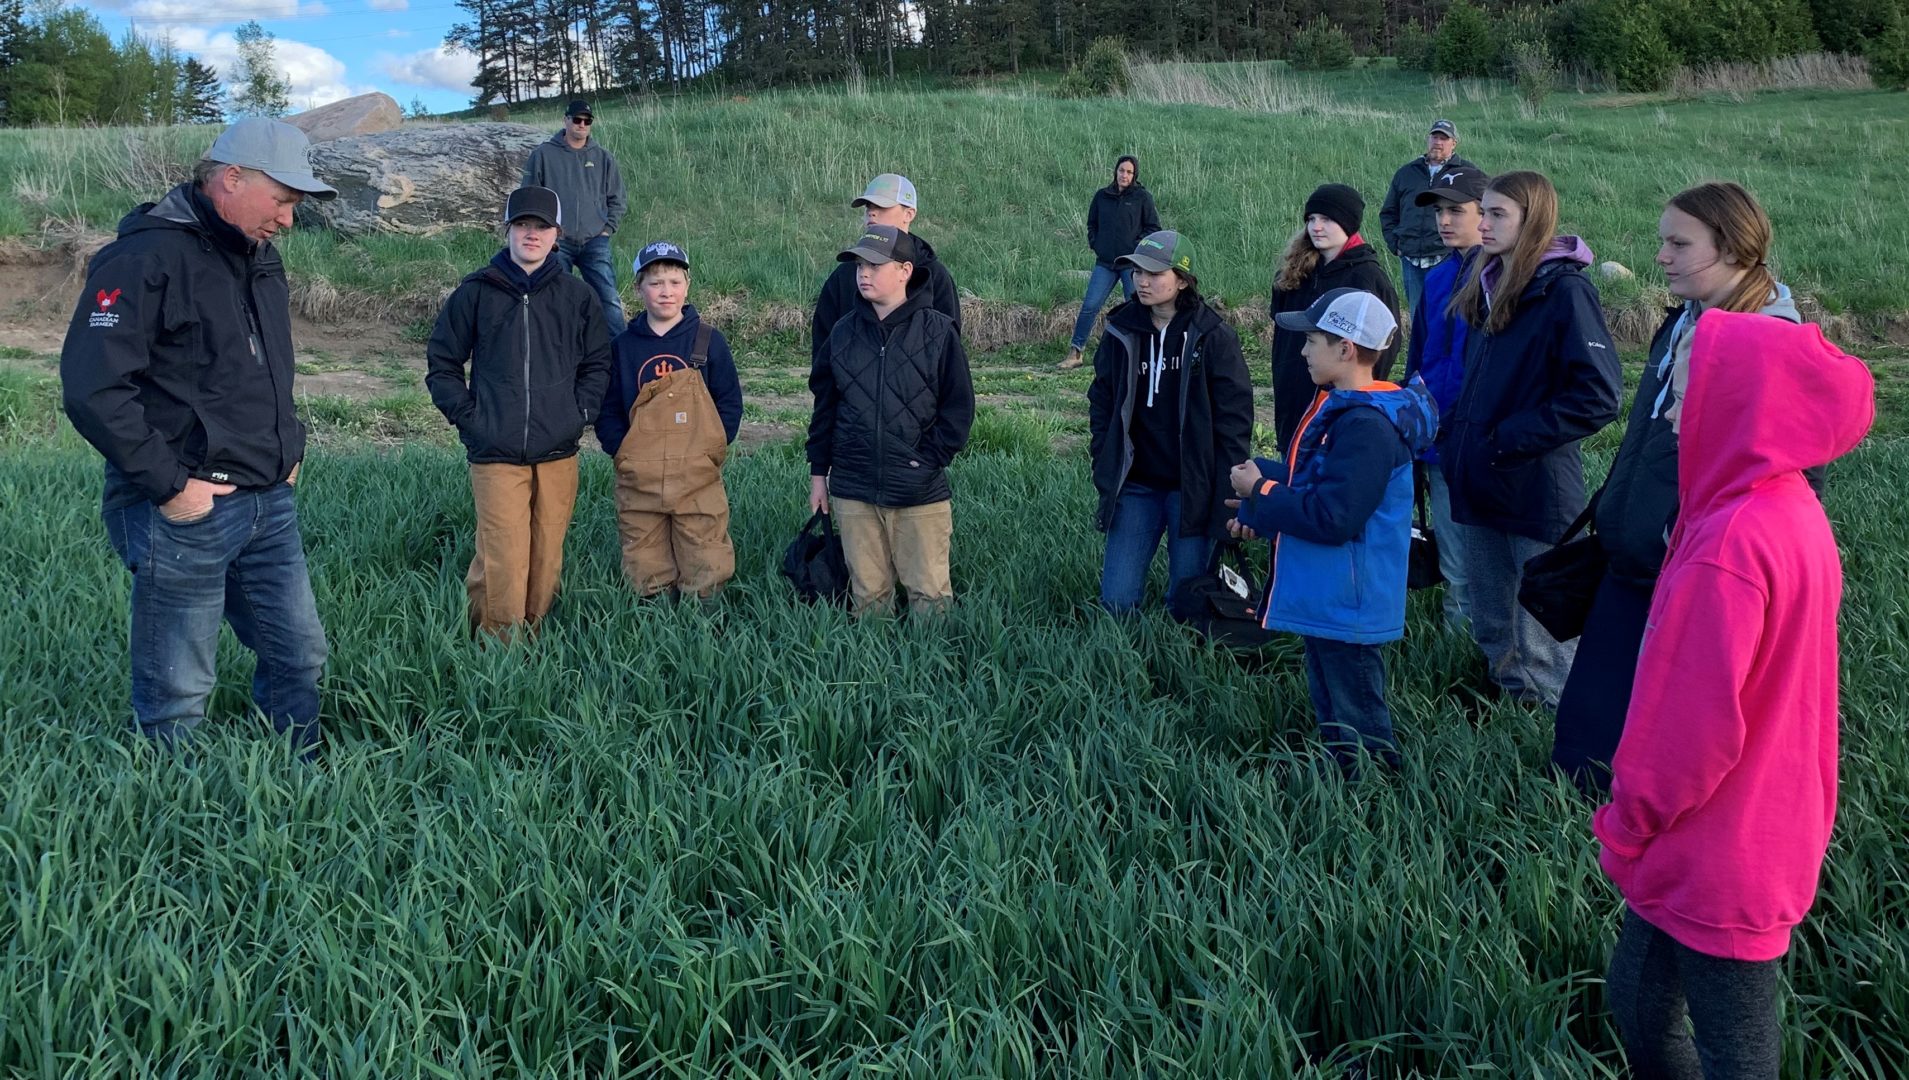 Members in a field at a crops meeting